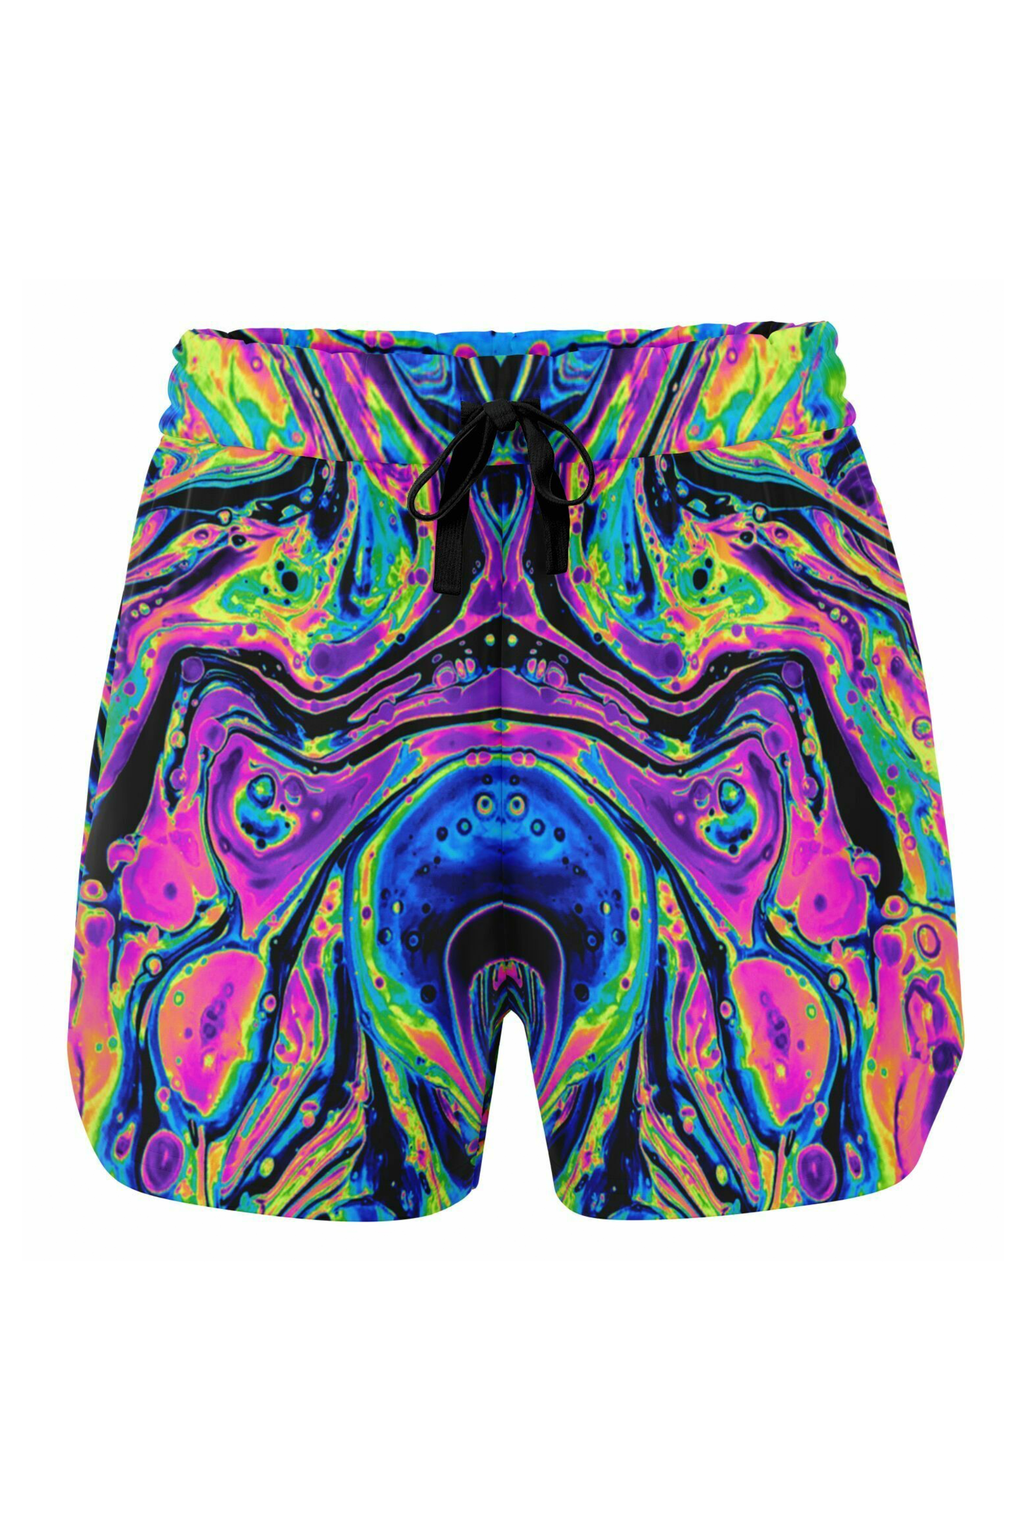 Groove Squad Shorts (Made to Order) - Liquid Mirage